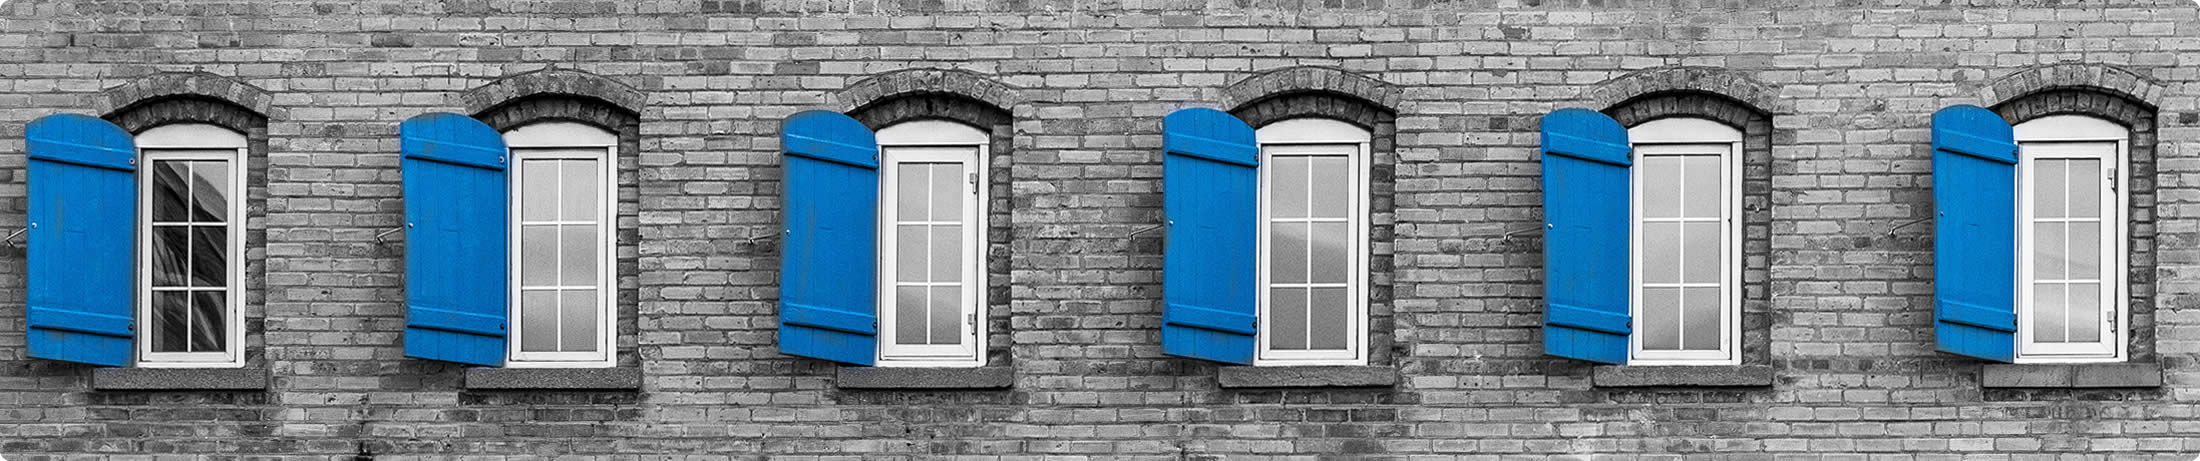 windows-with-blue-shutters-1